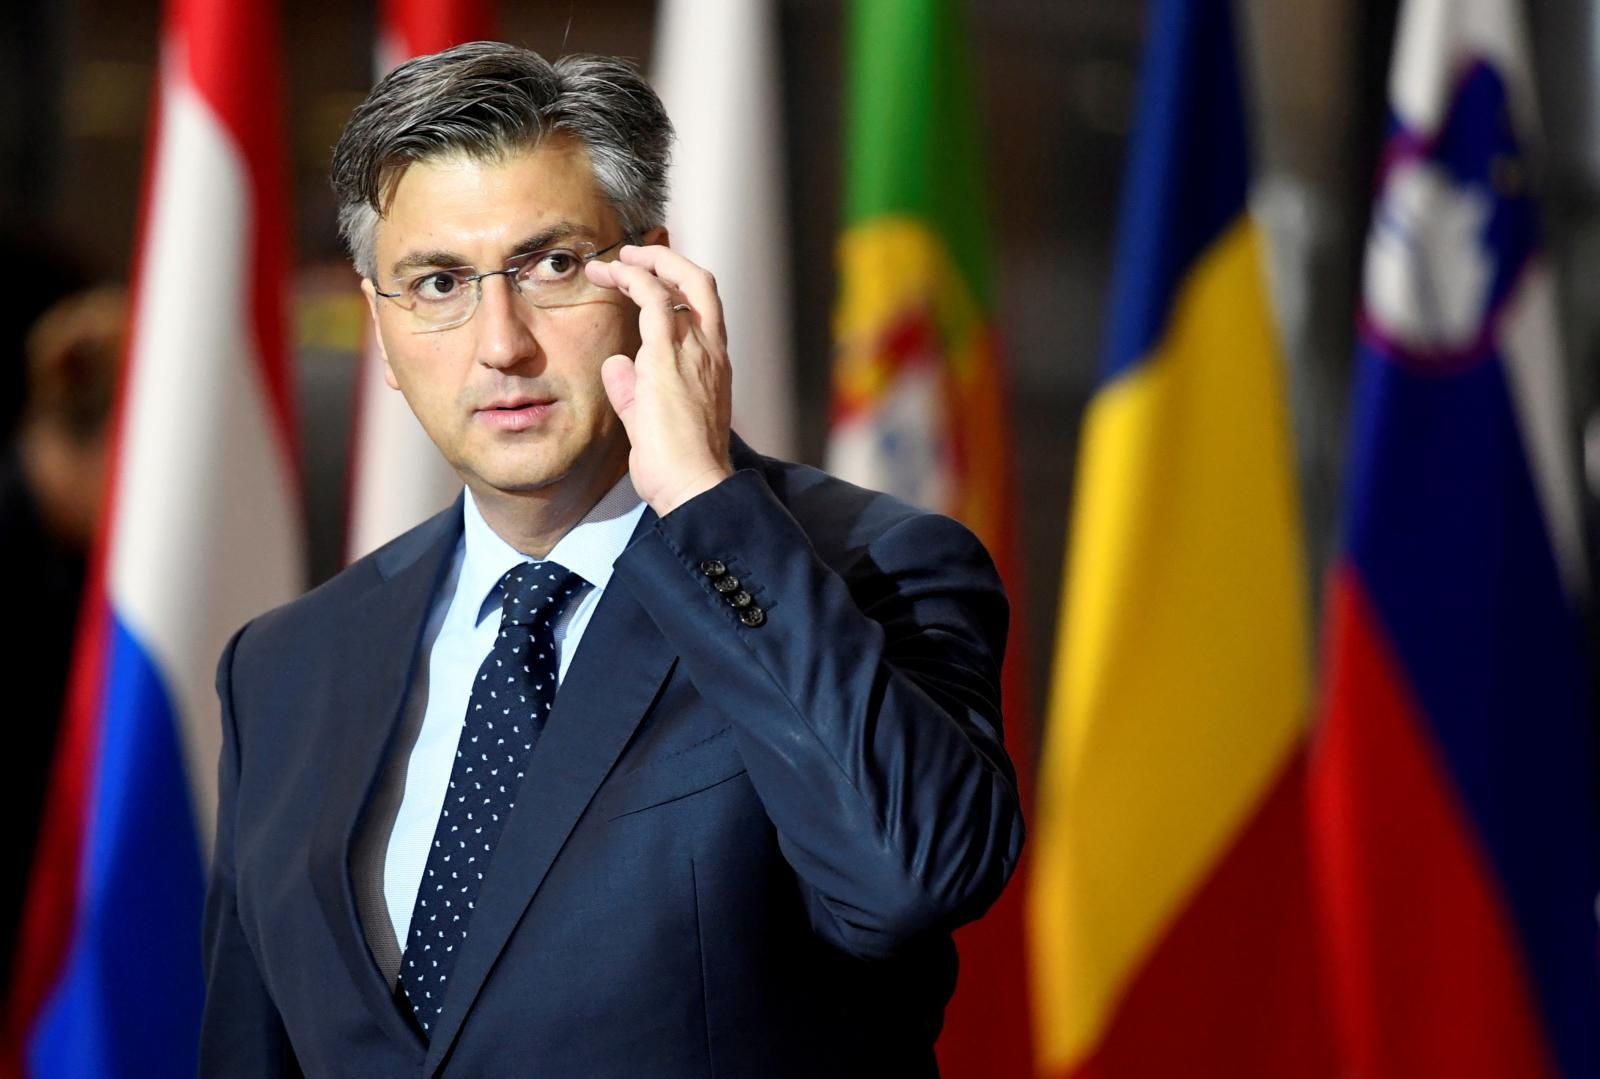 FILE PHOTO: EU summit in Brussels FILE PHOTO: Croatia's Prime Minister Andrej Plenkovic arrives for the second day of the European Union leaders summit dominated by Brexit, in Brussels, Belgium October 18, 2019. REUTERS/Piroschka van de Wouw/File Photo Piroschka Van De Wouw